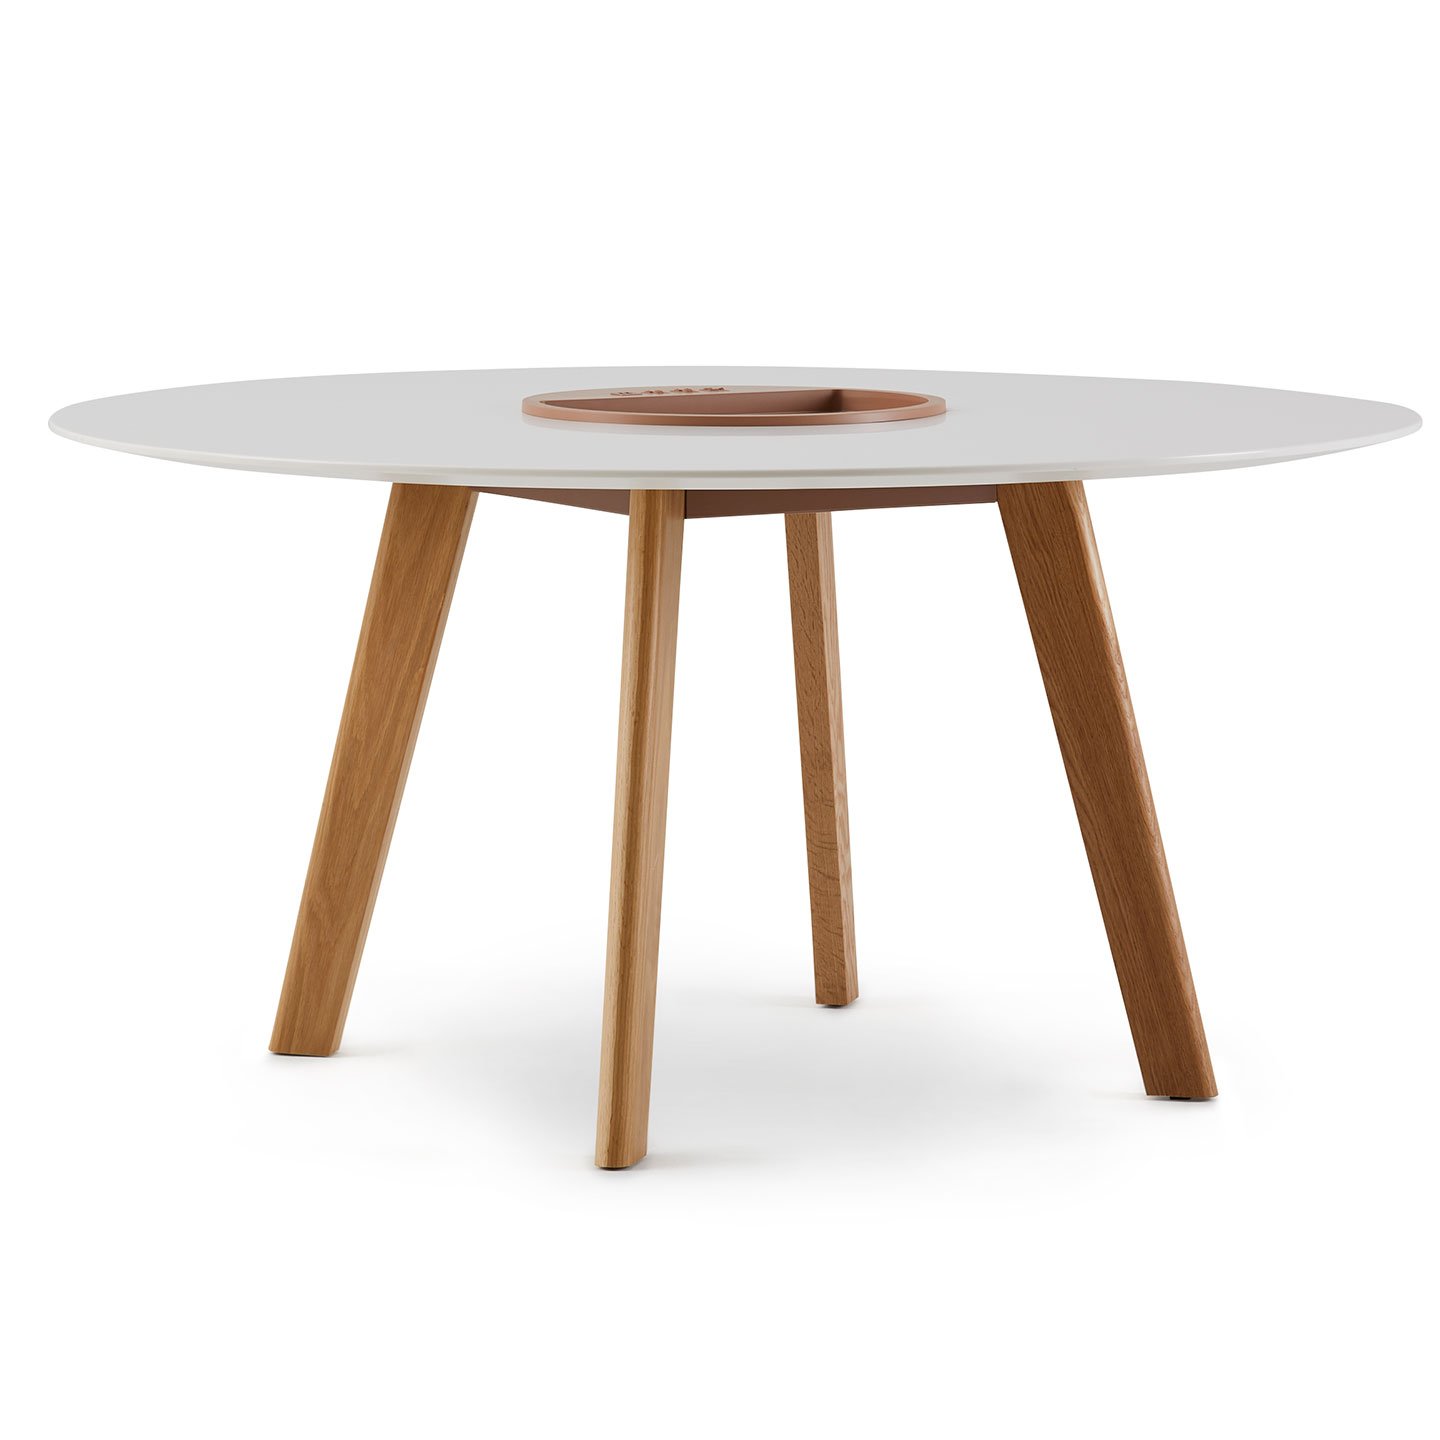 Haworth Immerse Table with 4 legs and circular white round top